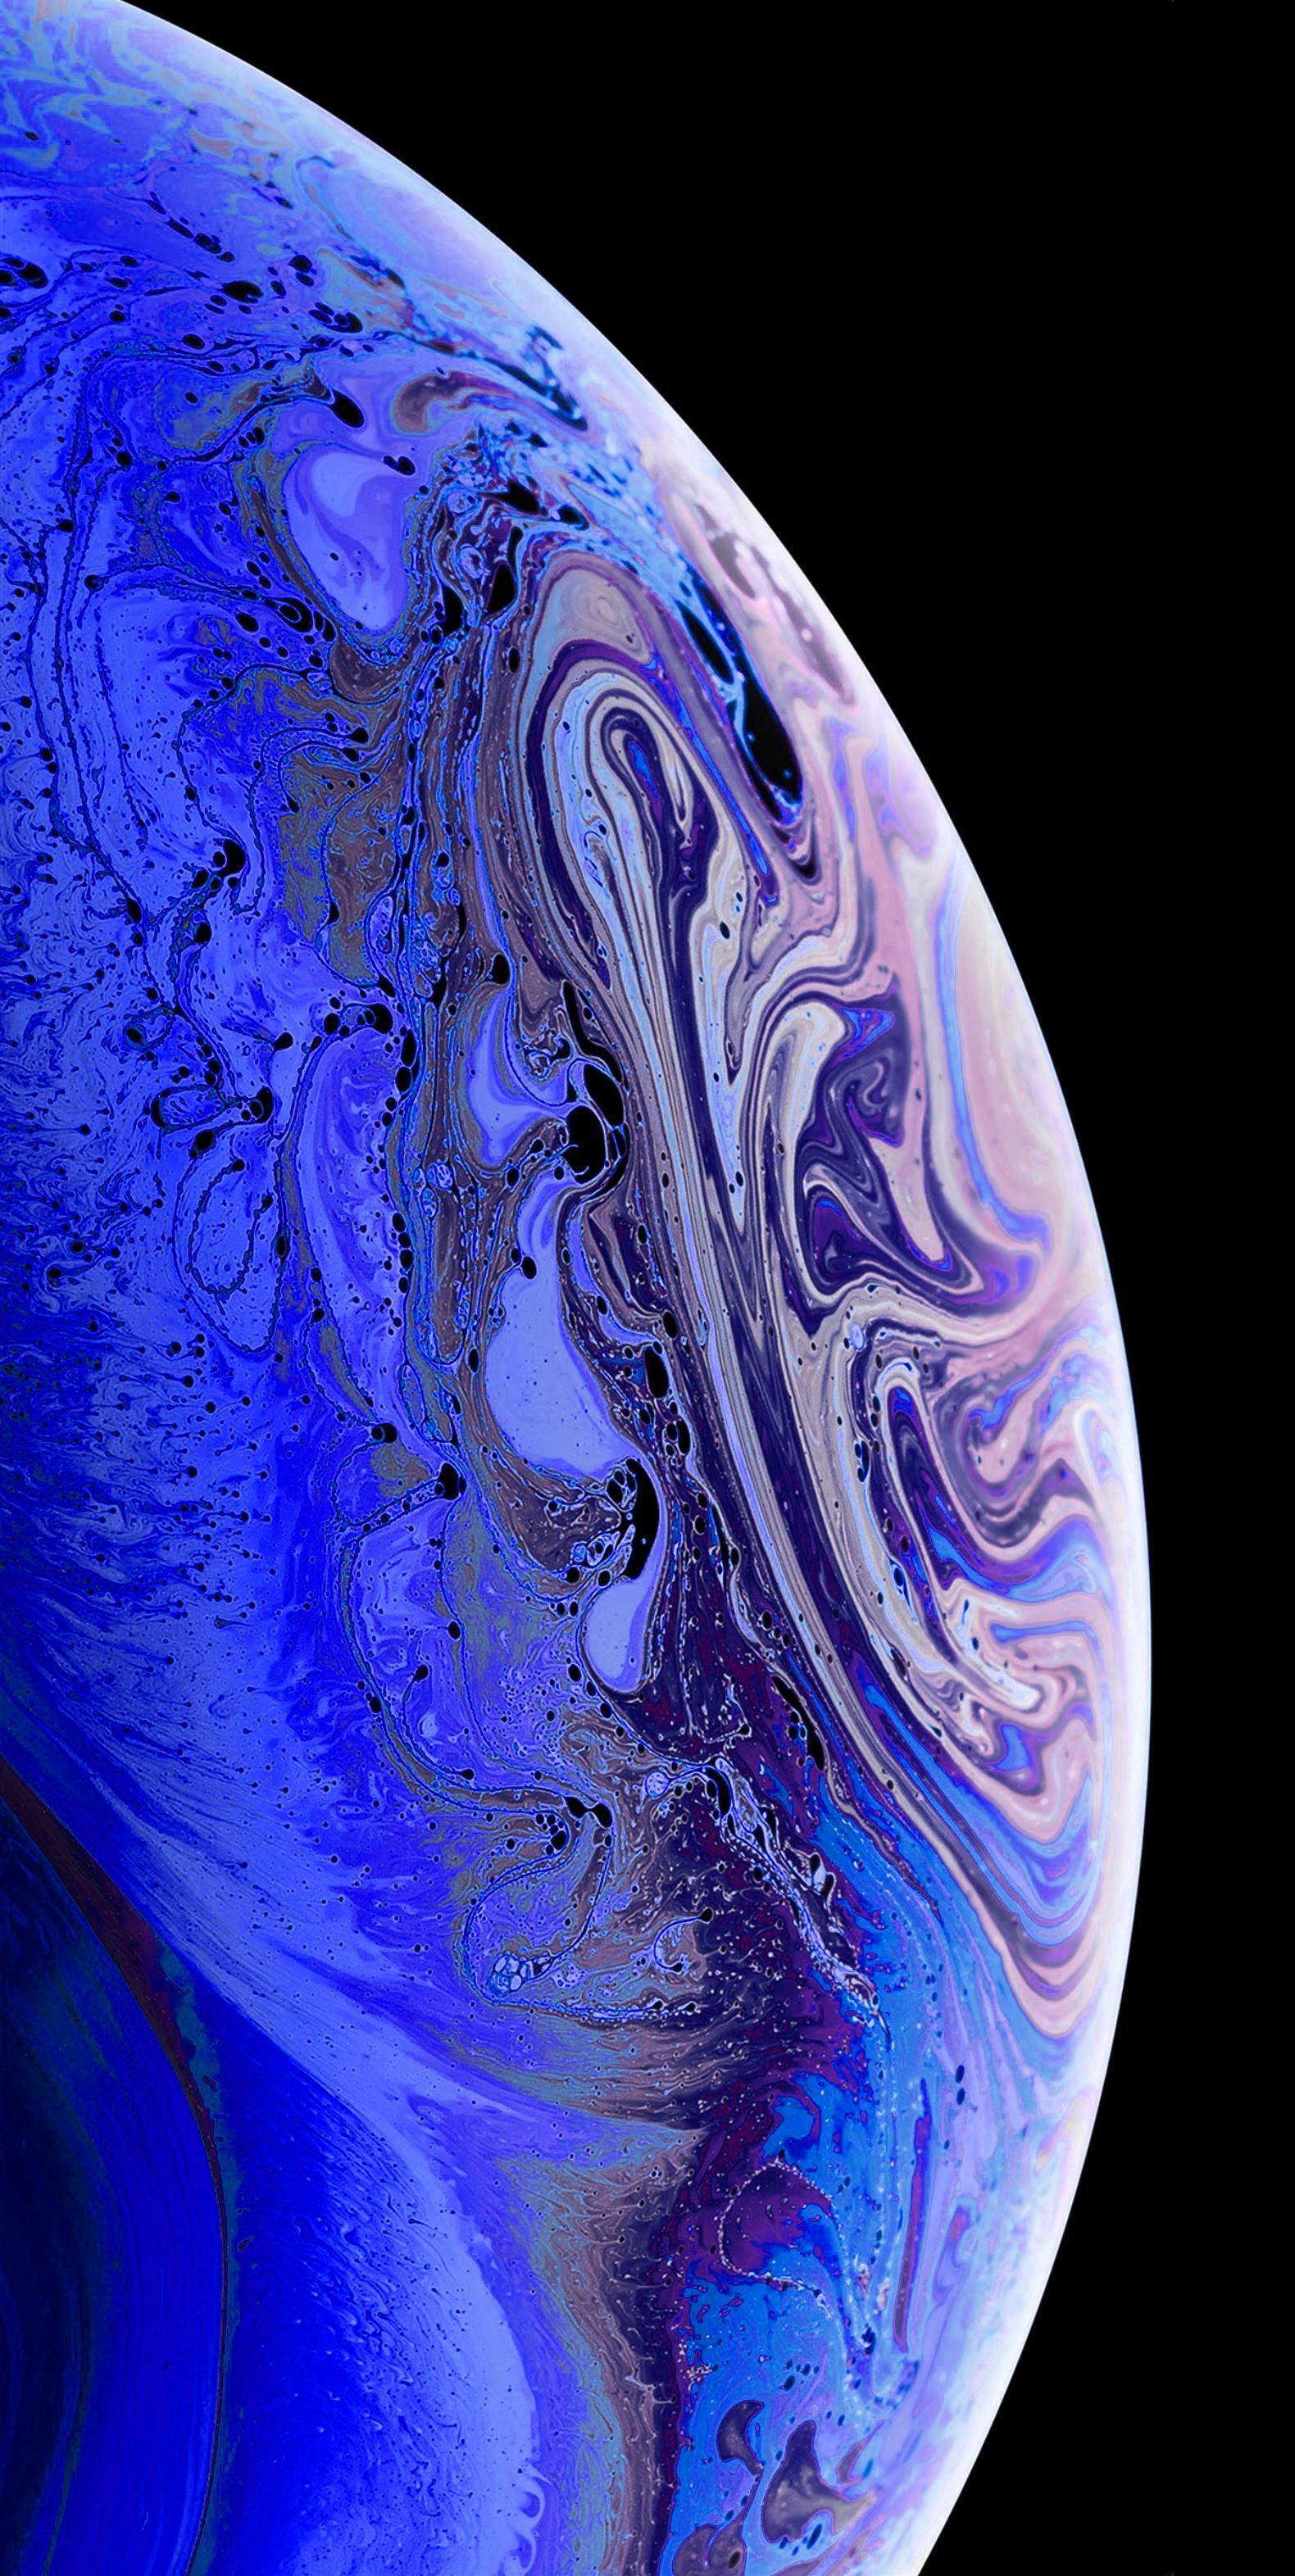 Dark Blue Re Colored IOS 12 Wallpaper [1580x3144] (i.redd.it) Submitted By Yevan7 To R Amoledbackg. Apple Wallpaper Iphone, Apple Wallpaper, Smartphone Wallpaper